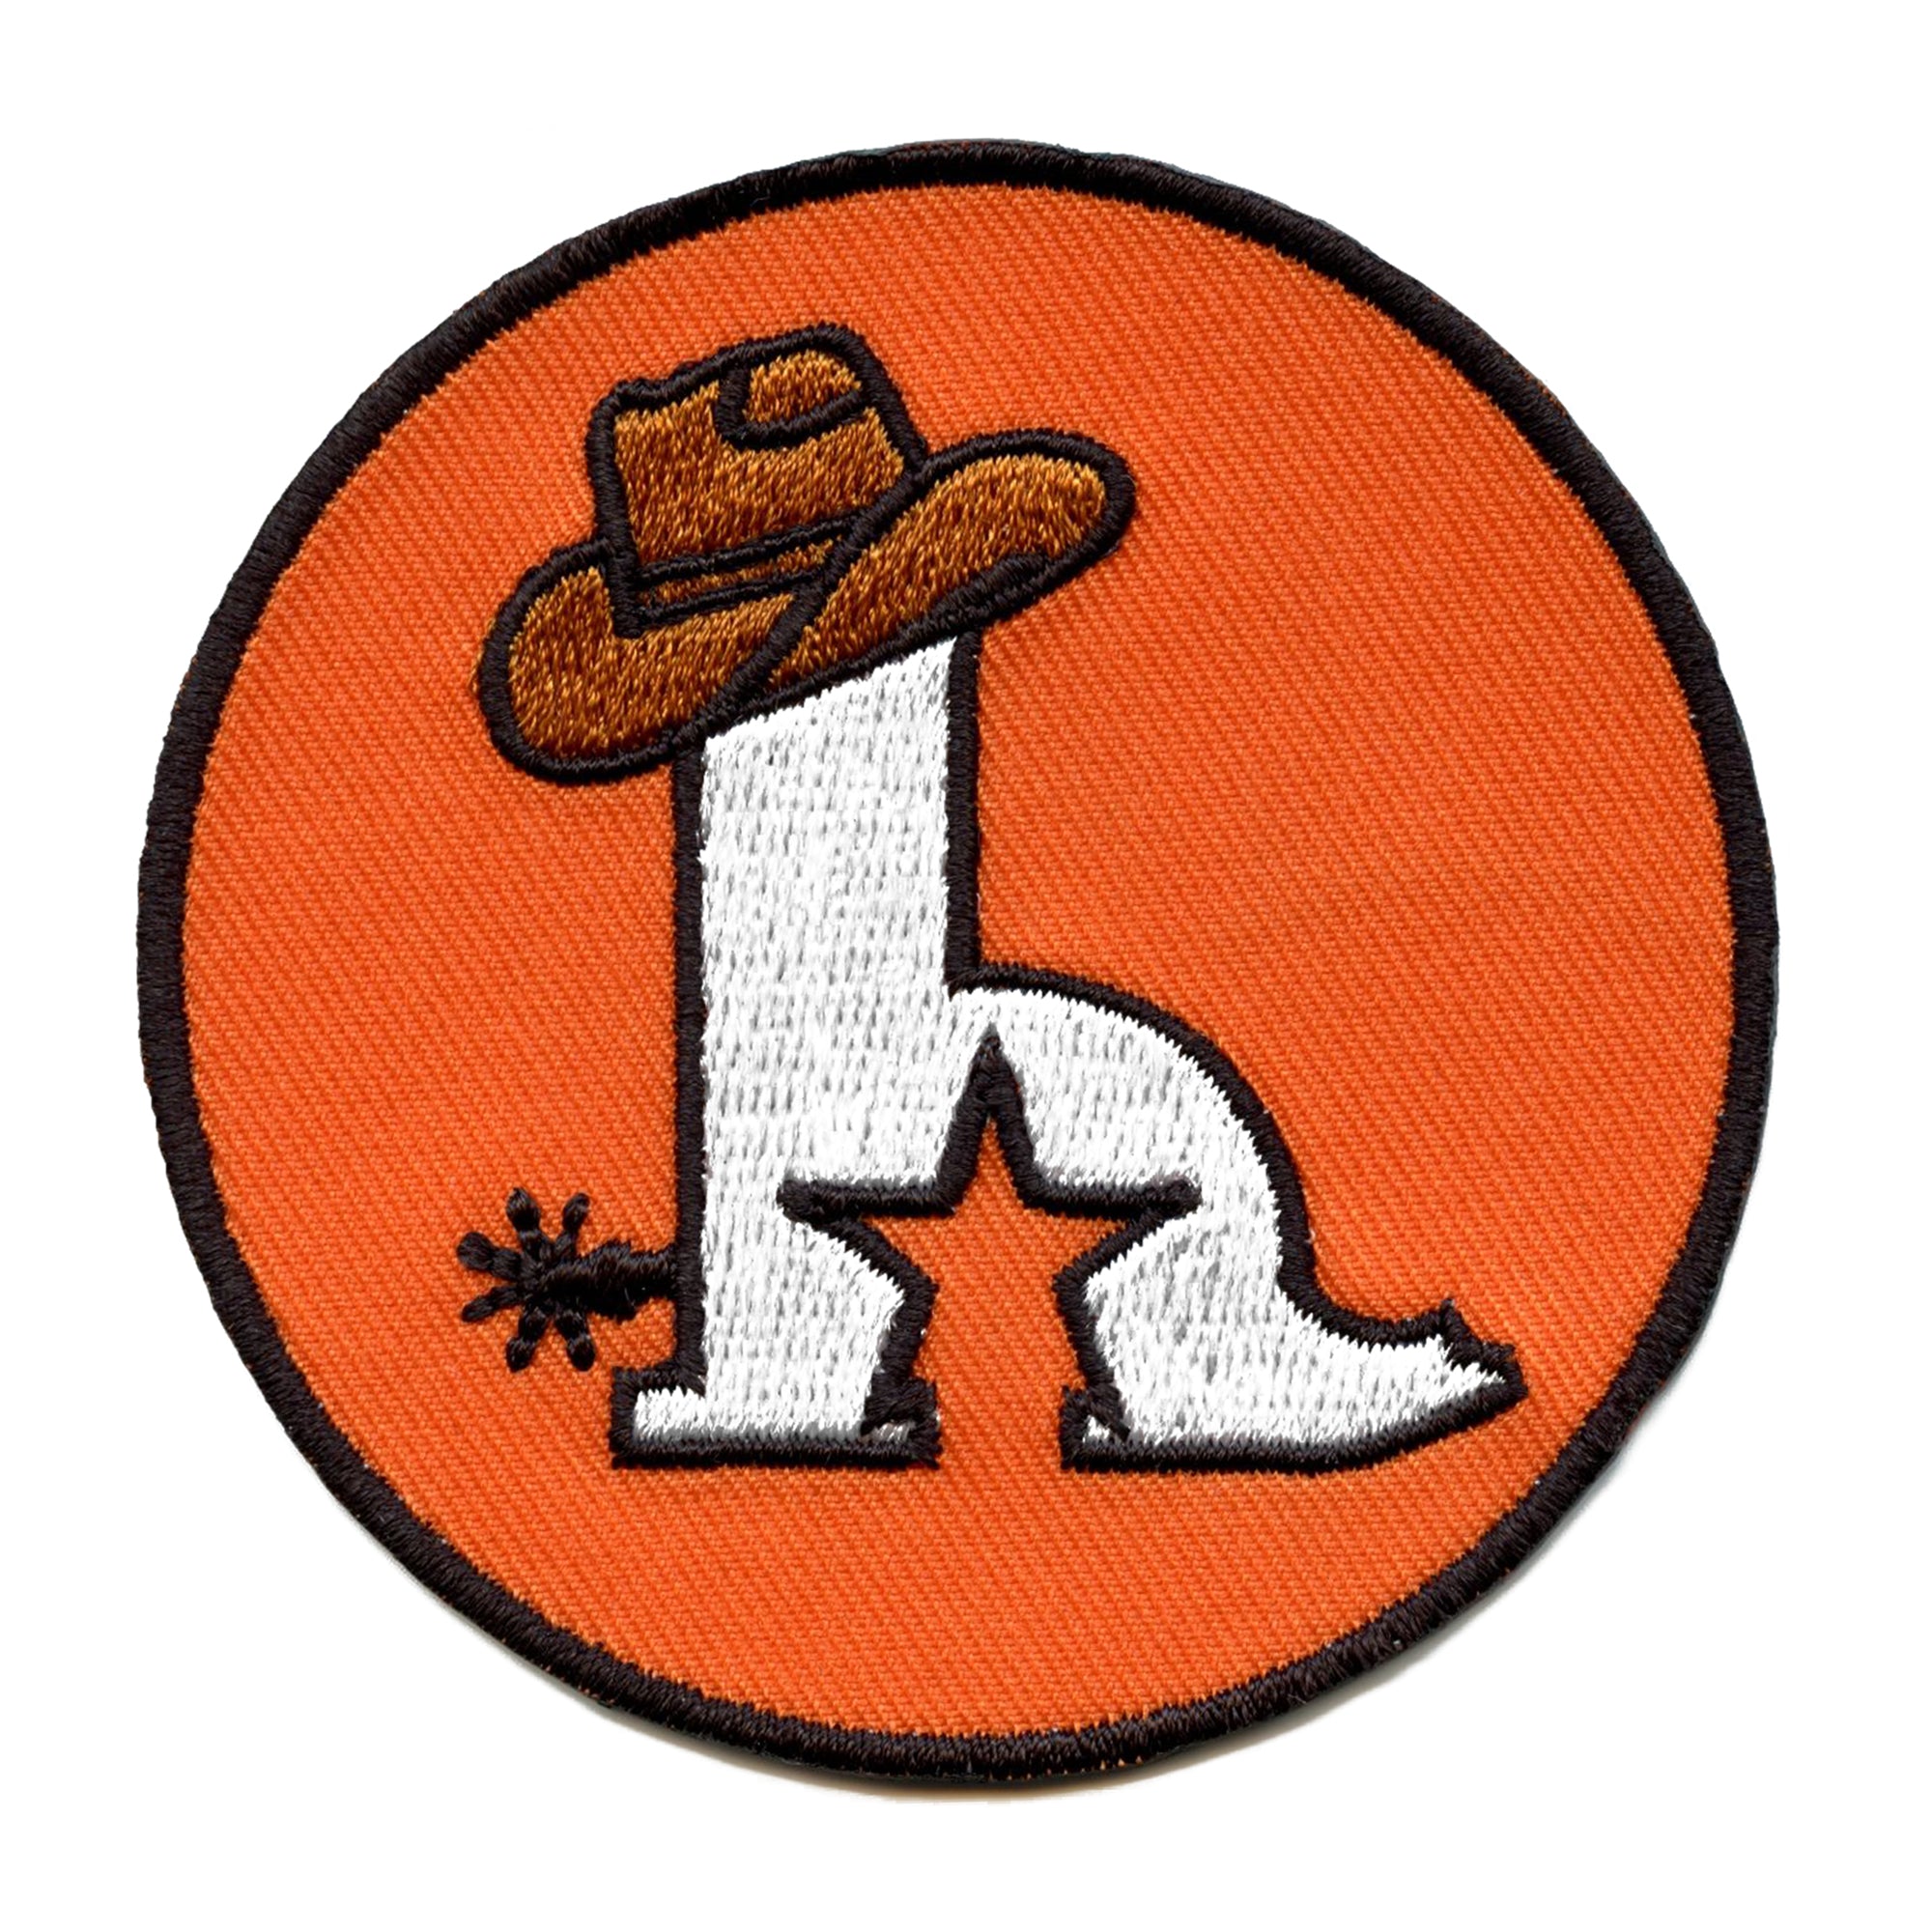 Houston Round H-Town Hate US Patch Parody Embroidered Iron on